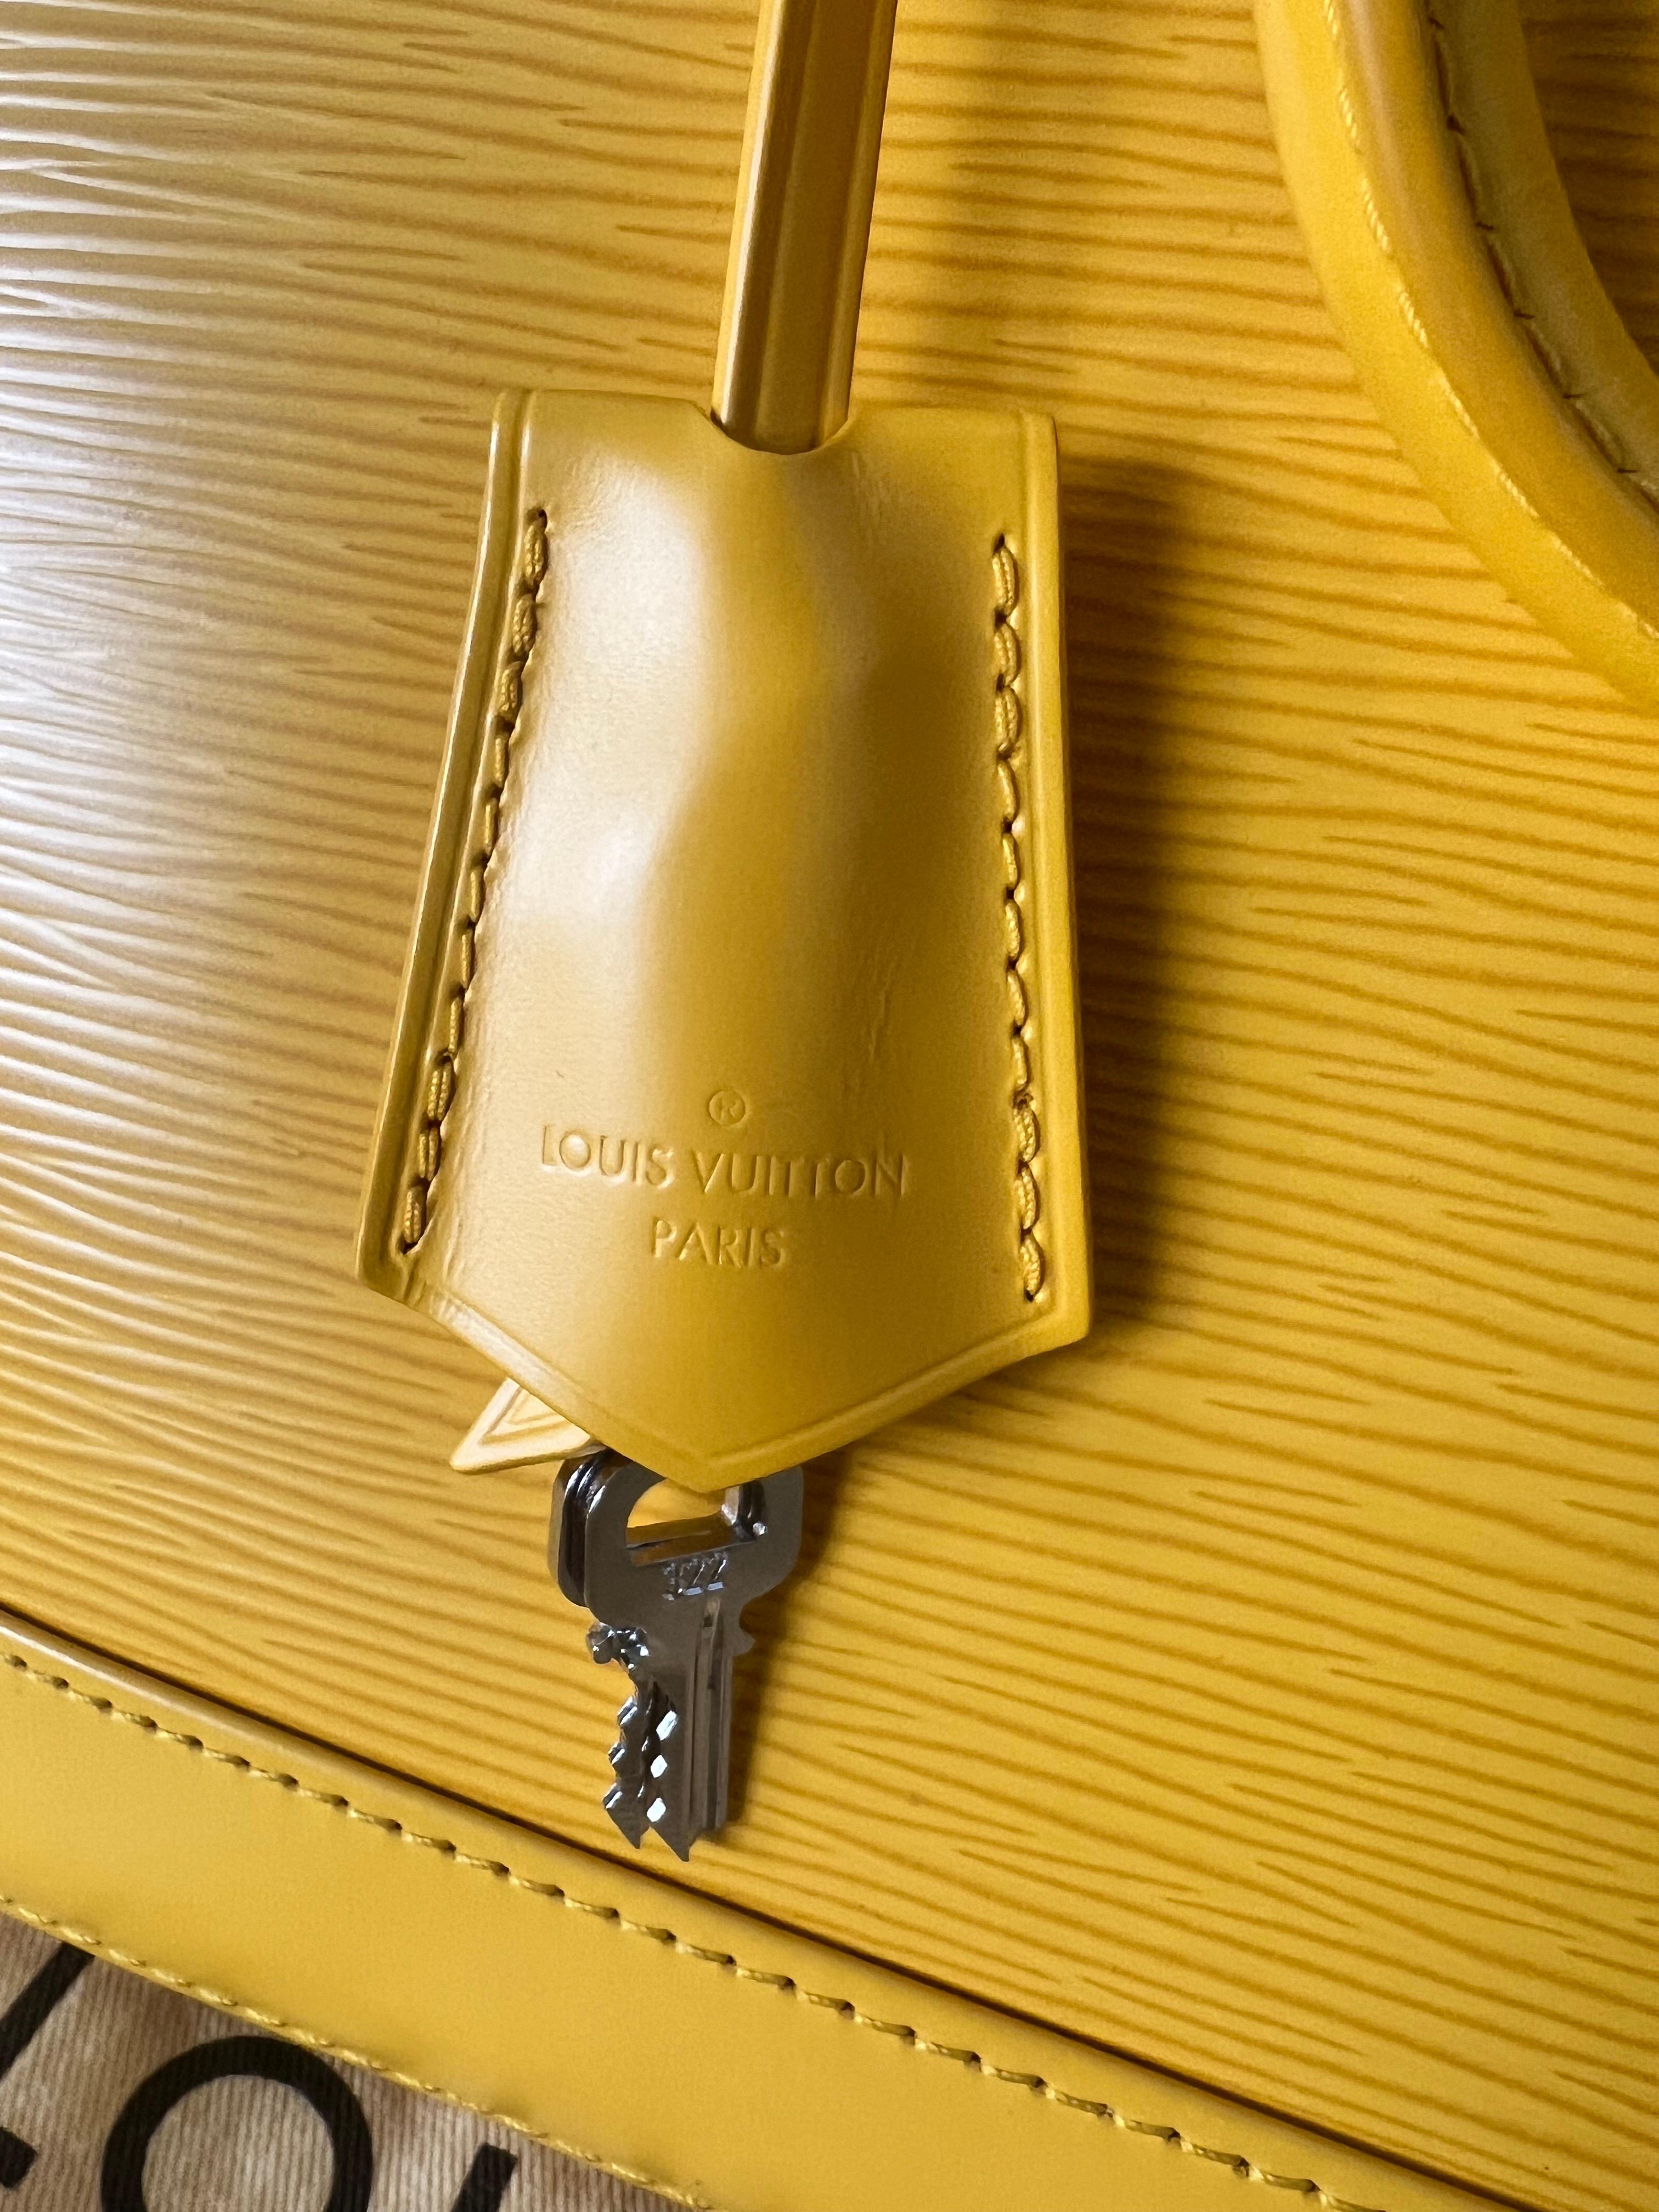 
The Louis Vuitton Yellow Epi Alma PM, as you described it, is a distinctive and stylish handbag that combines the iconic design of the Alma with vibrant details. Here's a breakdown of its features:

Color and Material:
The use of yellow Epi leather